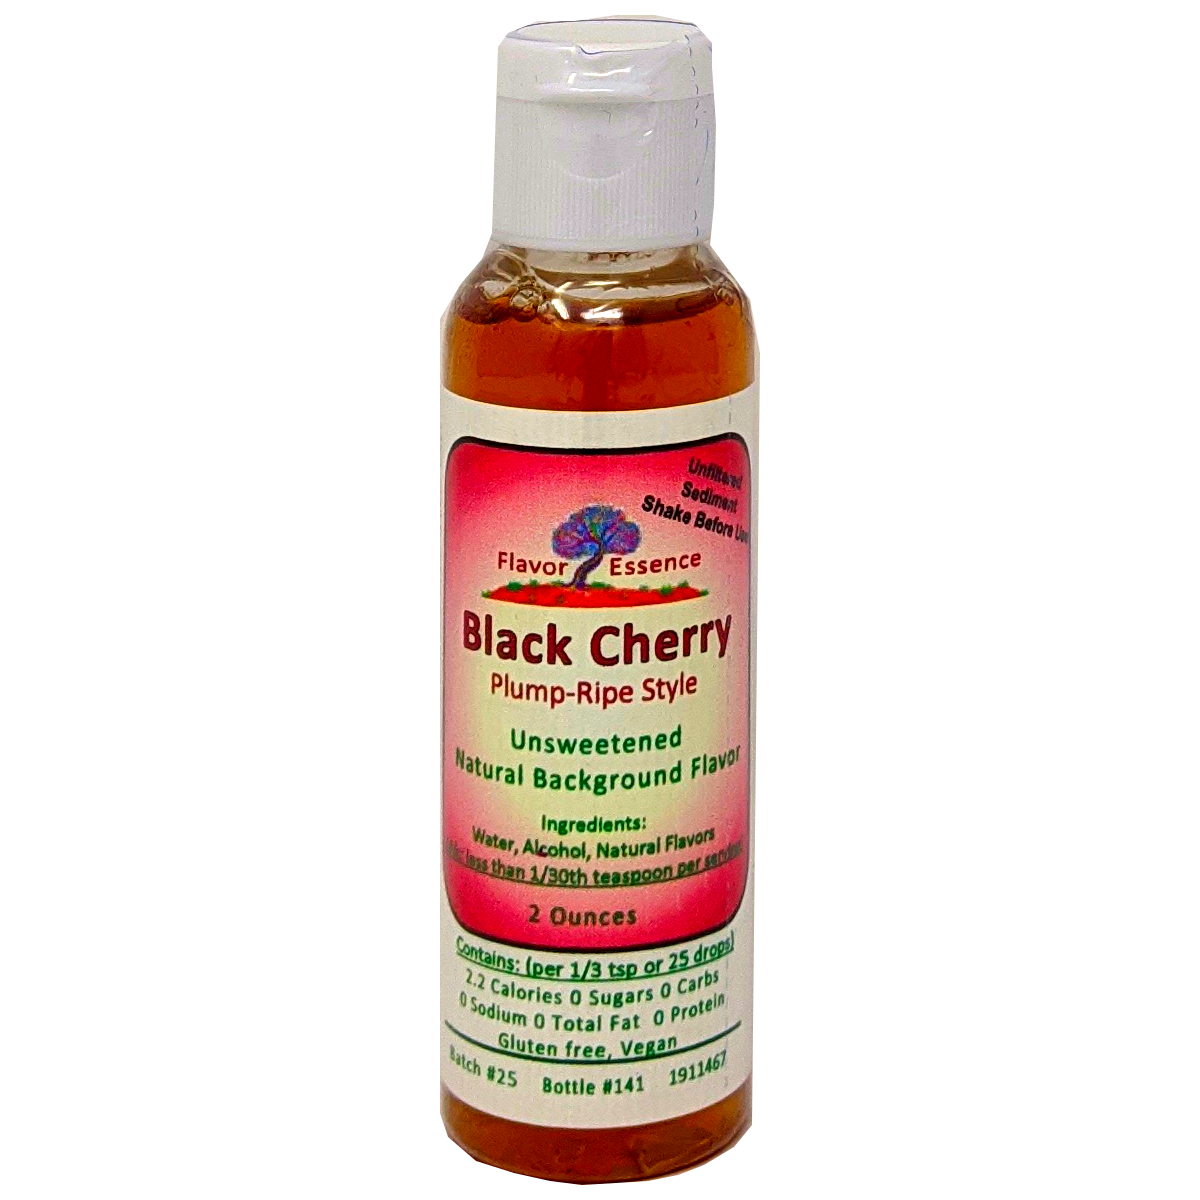 Flavor Essence Black Cherry 2oz - Natural Unsweetened Background Flavoring